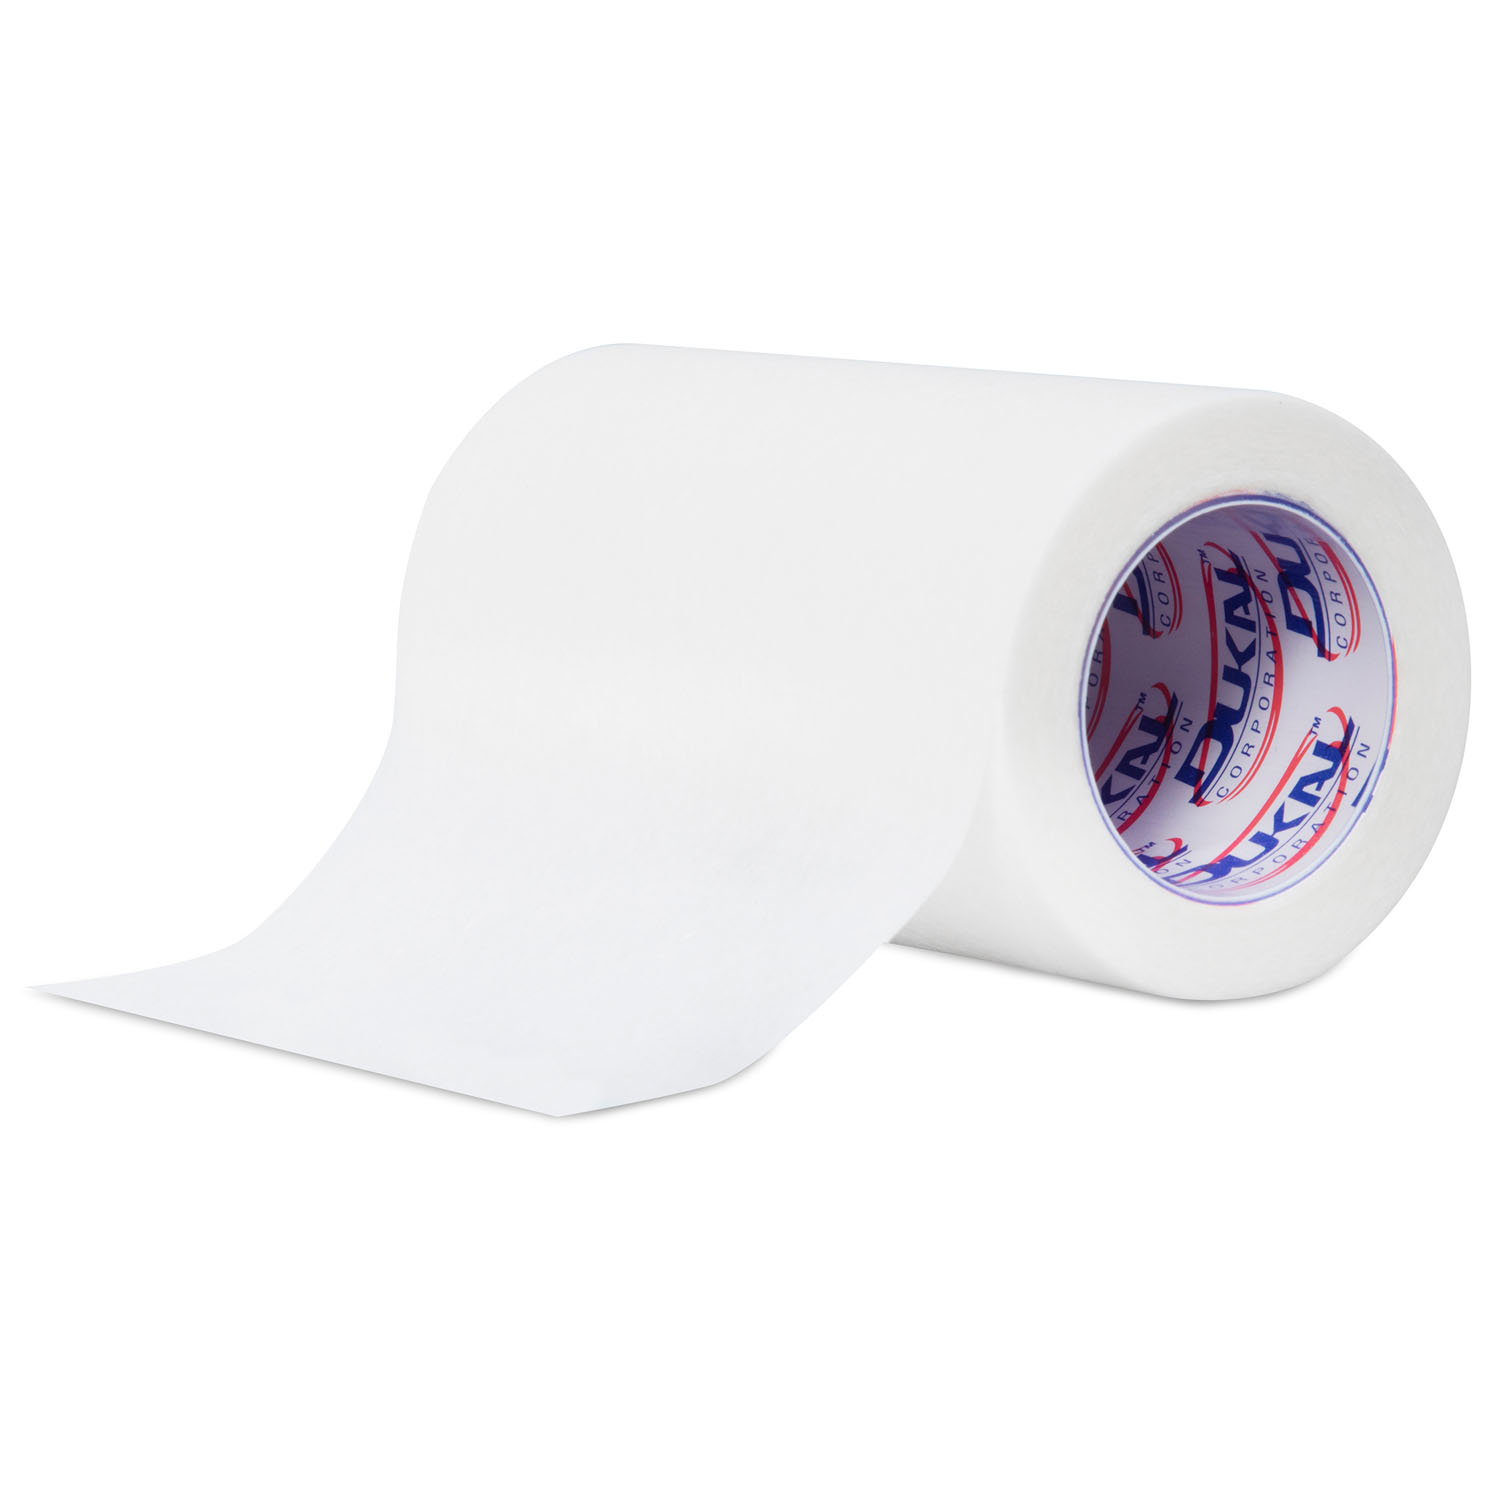 DUKAL SURGICAL TAPE - PAPER : P310 BX $8.49 Stocked